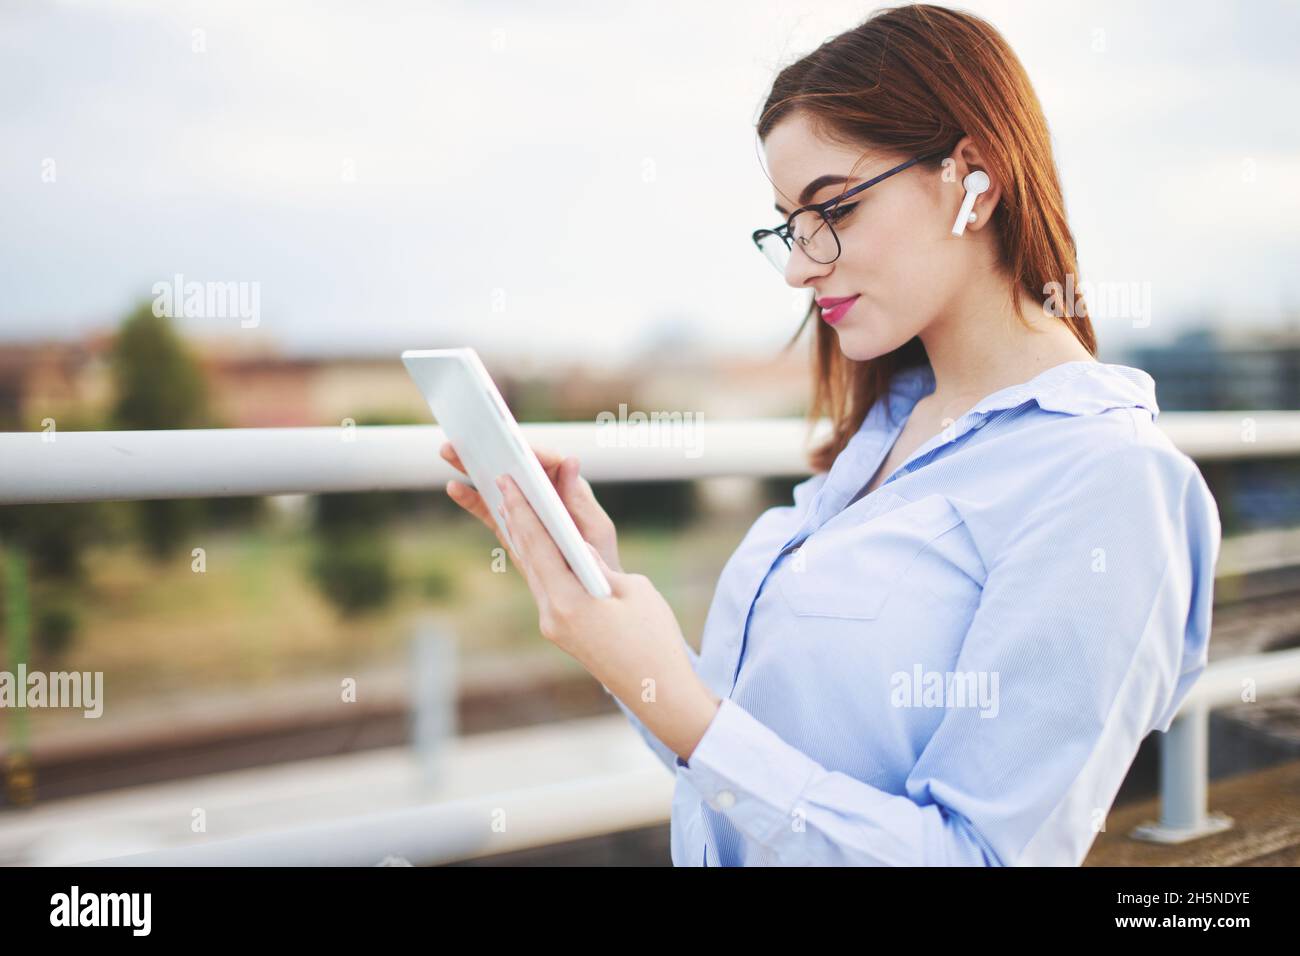 Redhead Caucasian young businesswoman with hands-free device using tablet outdoors Stock Photo